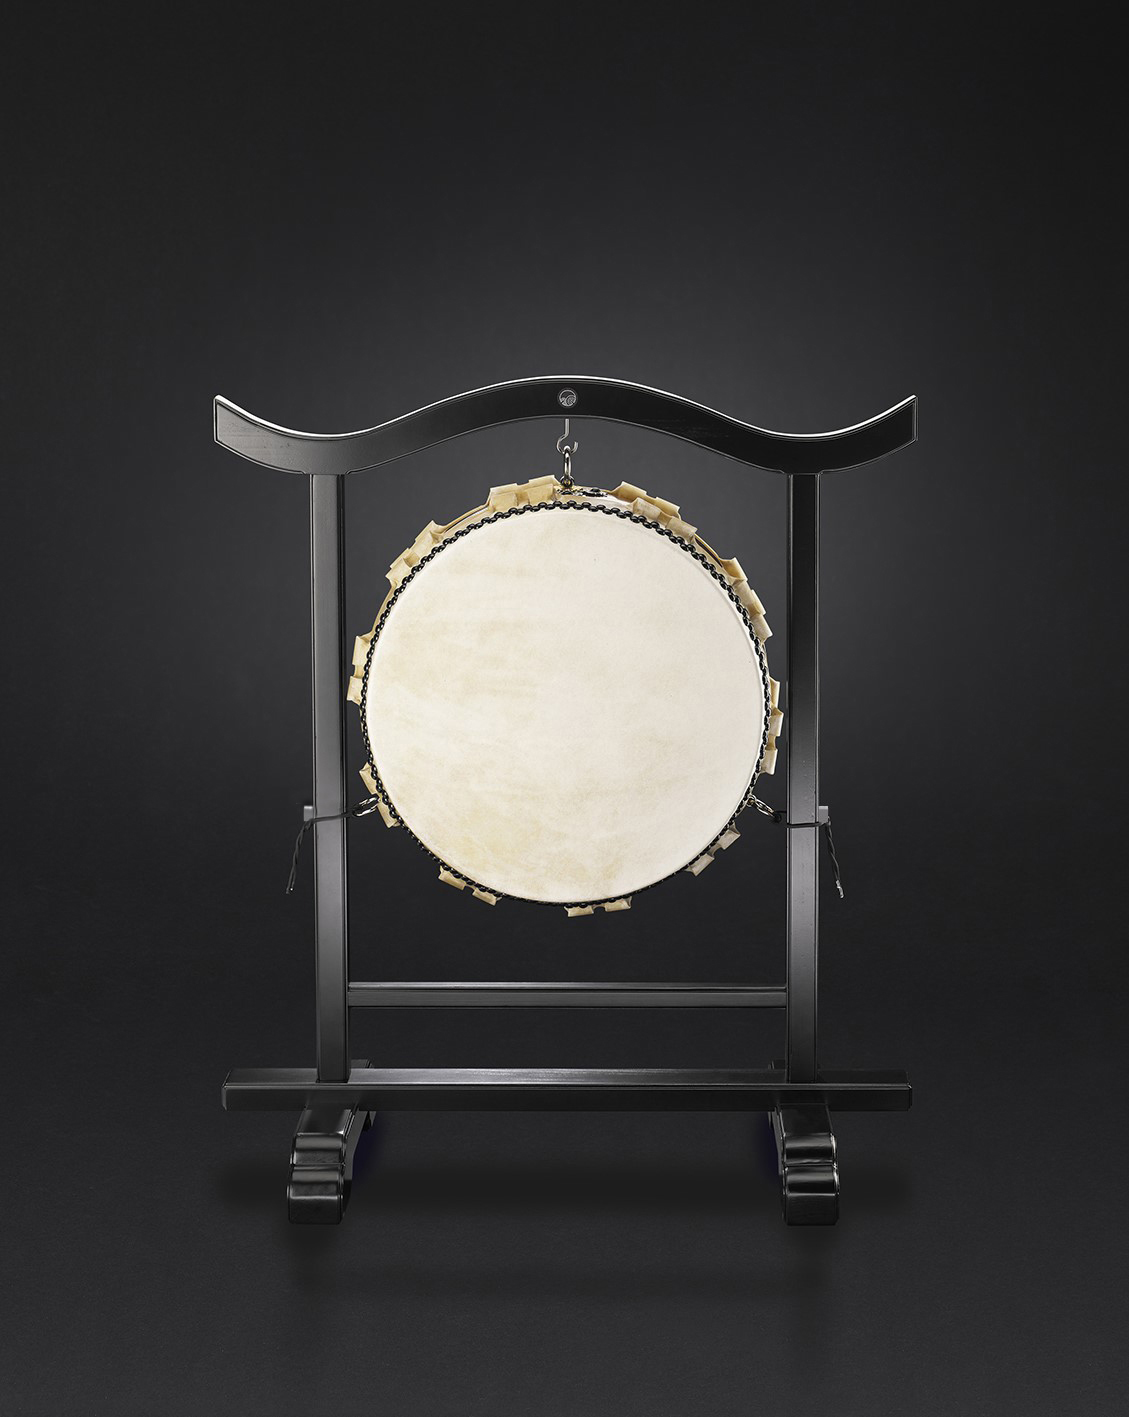 Hira-Daiko hq Ø48cm/h.25cm (695€) with temple stand (325€)